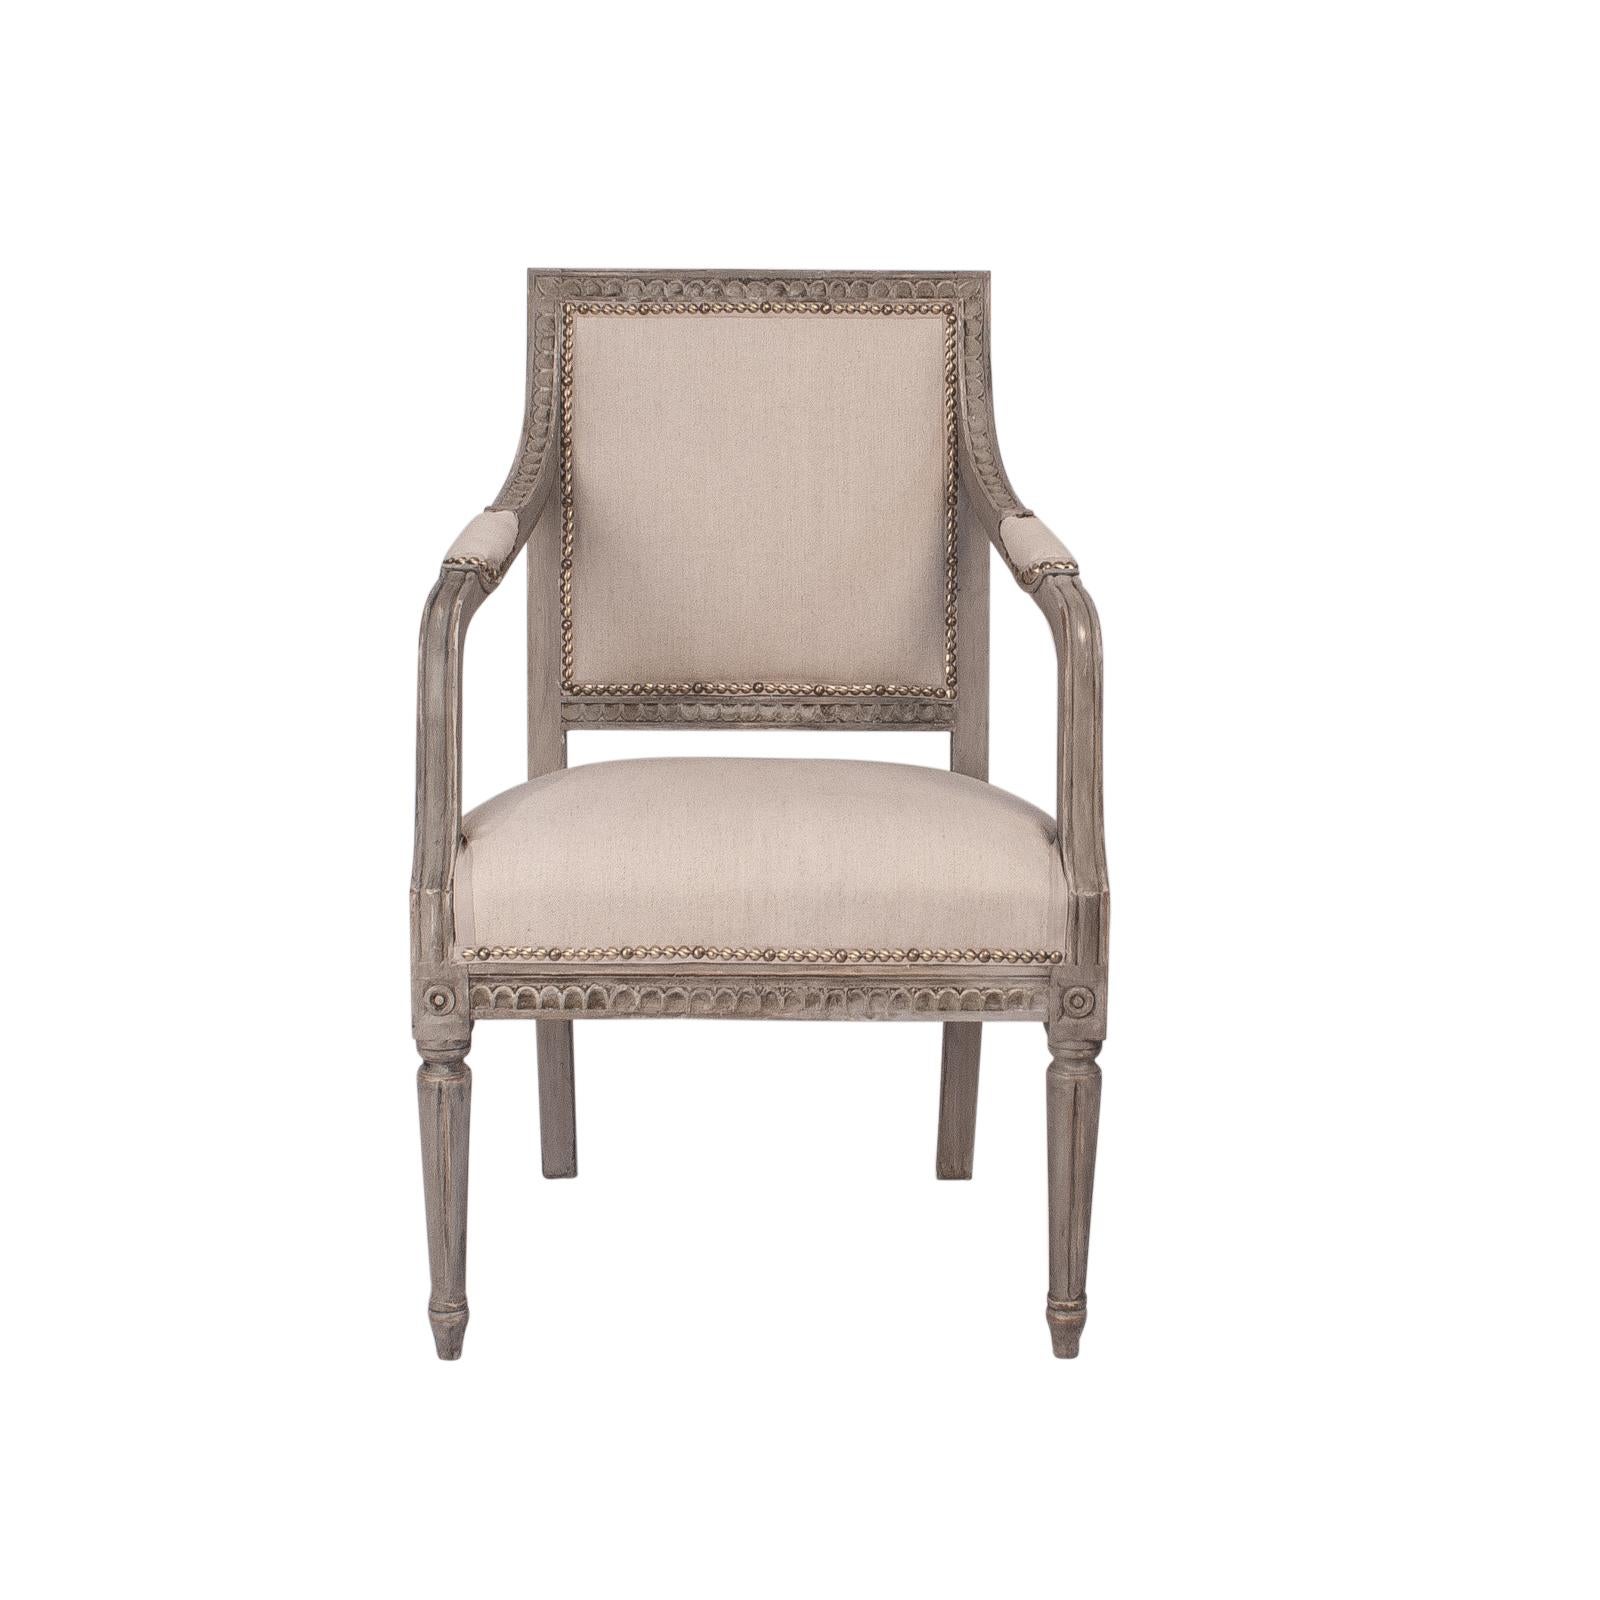 A pair of Swedish Gustavian Style painted armchairs, circa 1890. In later grey paint with refreshed upholstery. The carving is particularly good. A Classic design that would look good in most interiors.